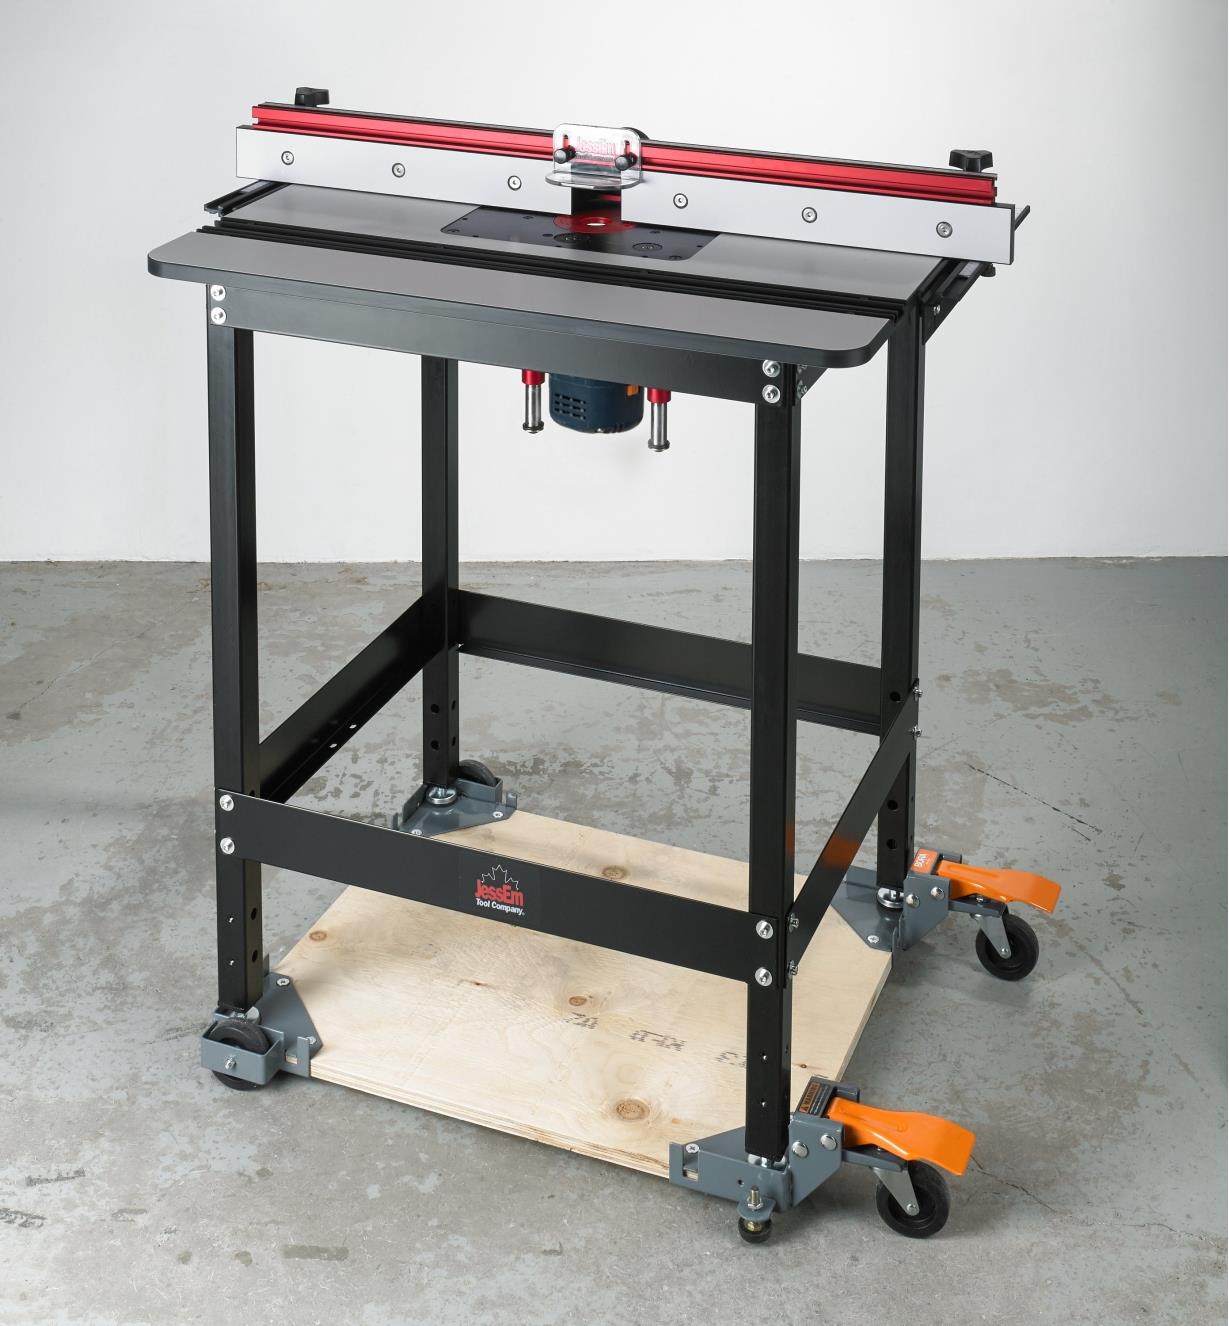 Mobile Base supporting a router table